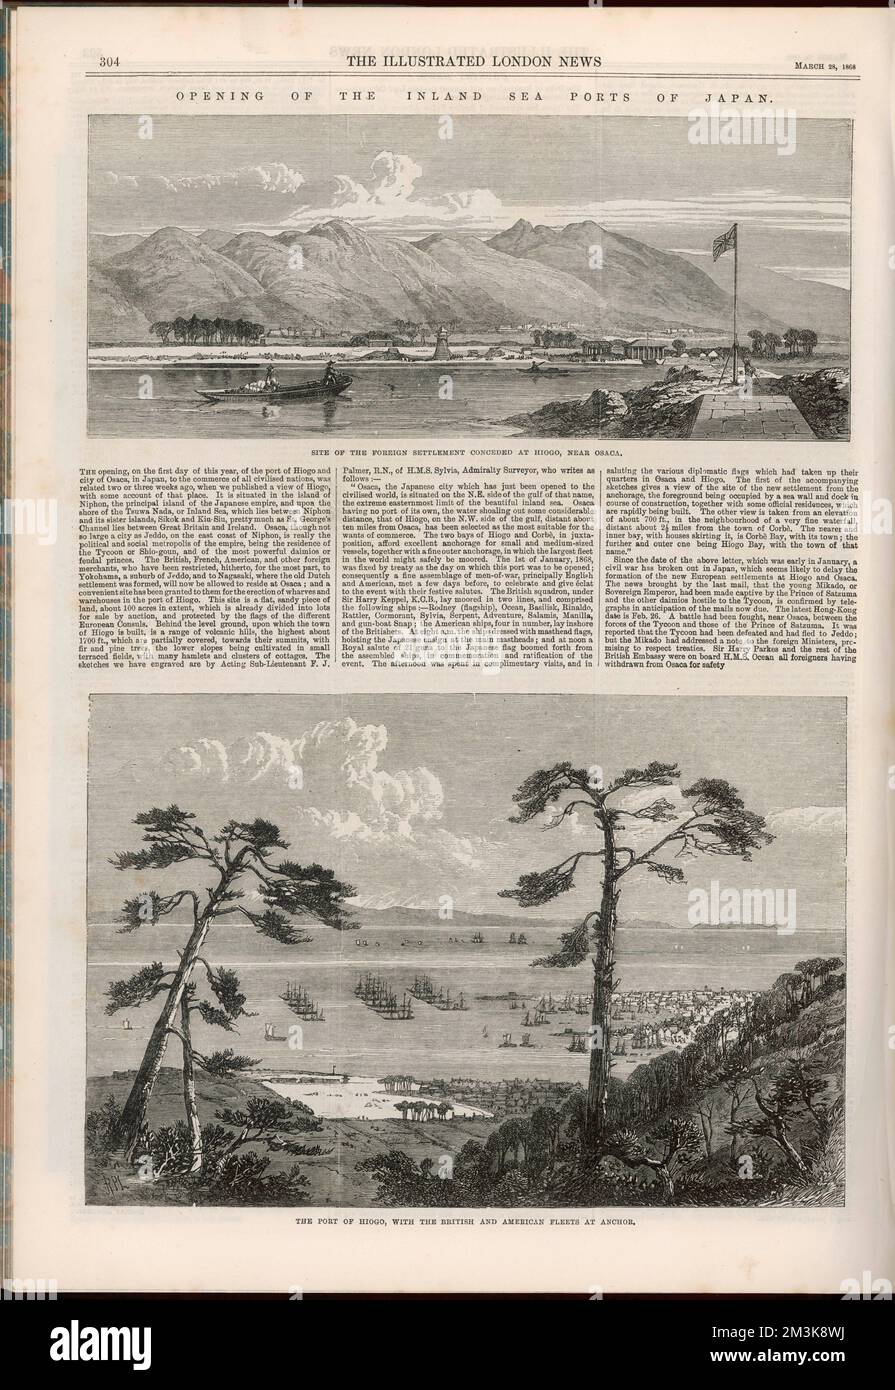 A page from the Illustrated  London news describing the  opening of the inland sea  ports of Japan on 1 January  1868, including two engravings  of Hiogo, near Osaka     Date: 28 March 1868 Stock Photo